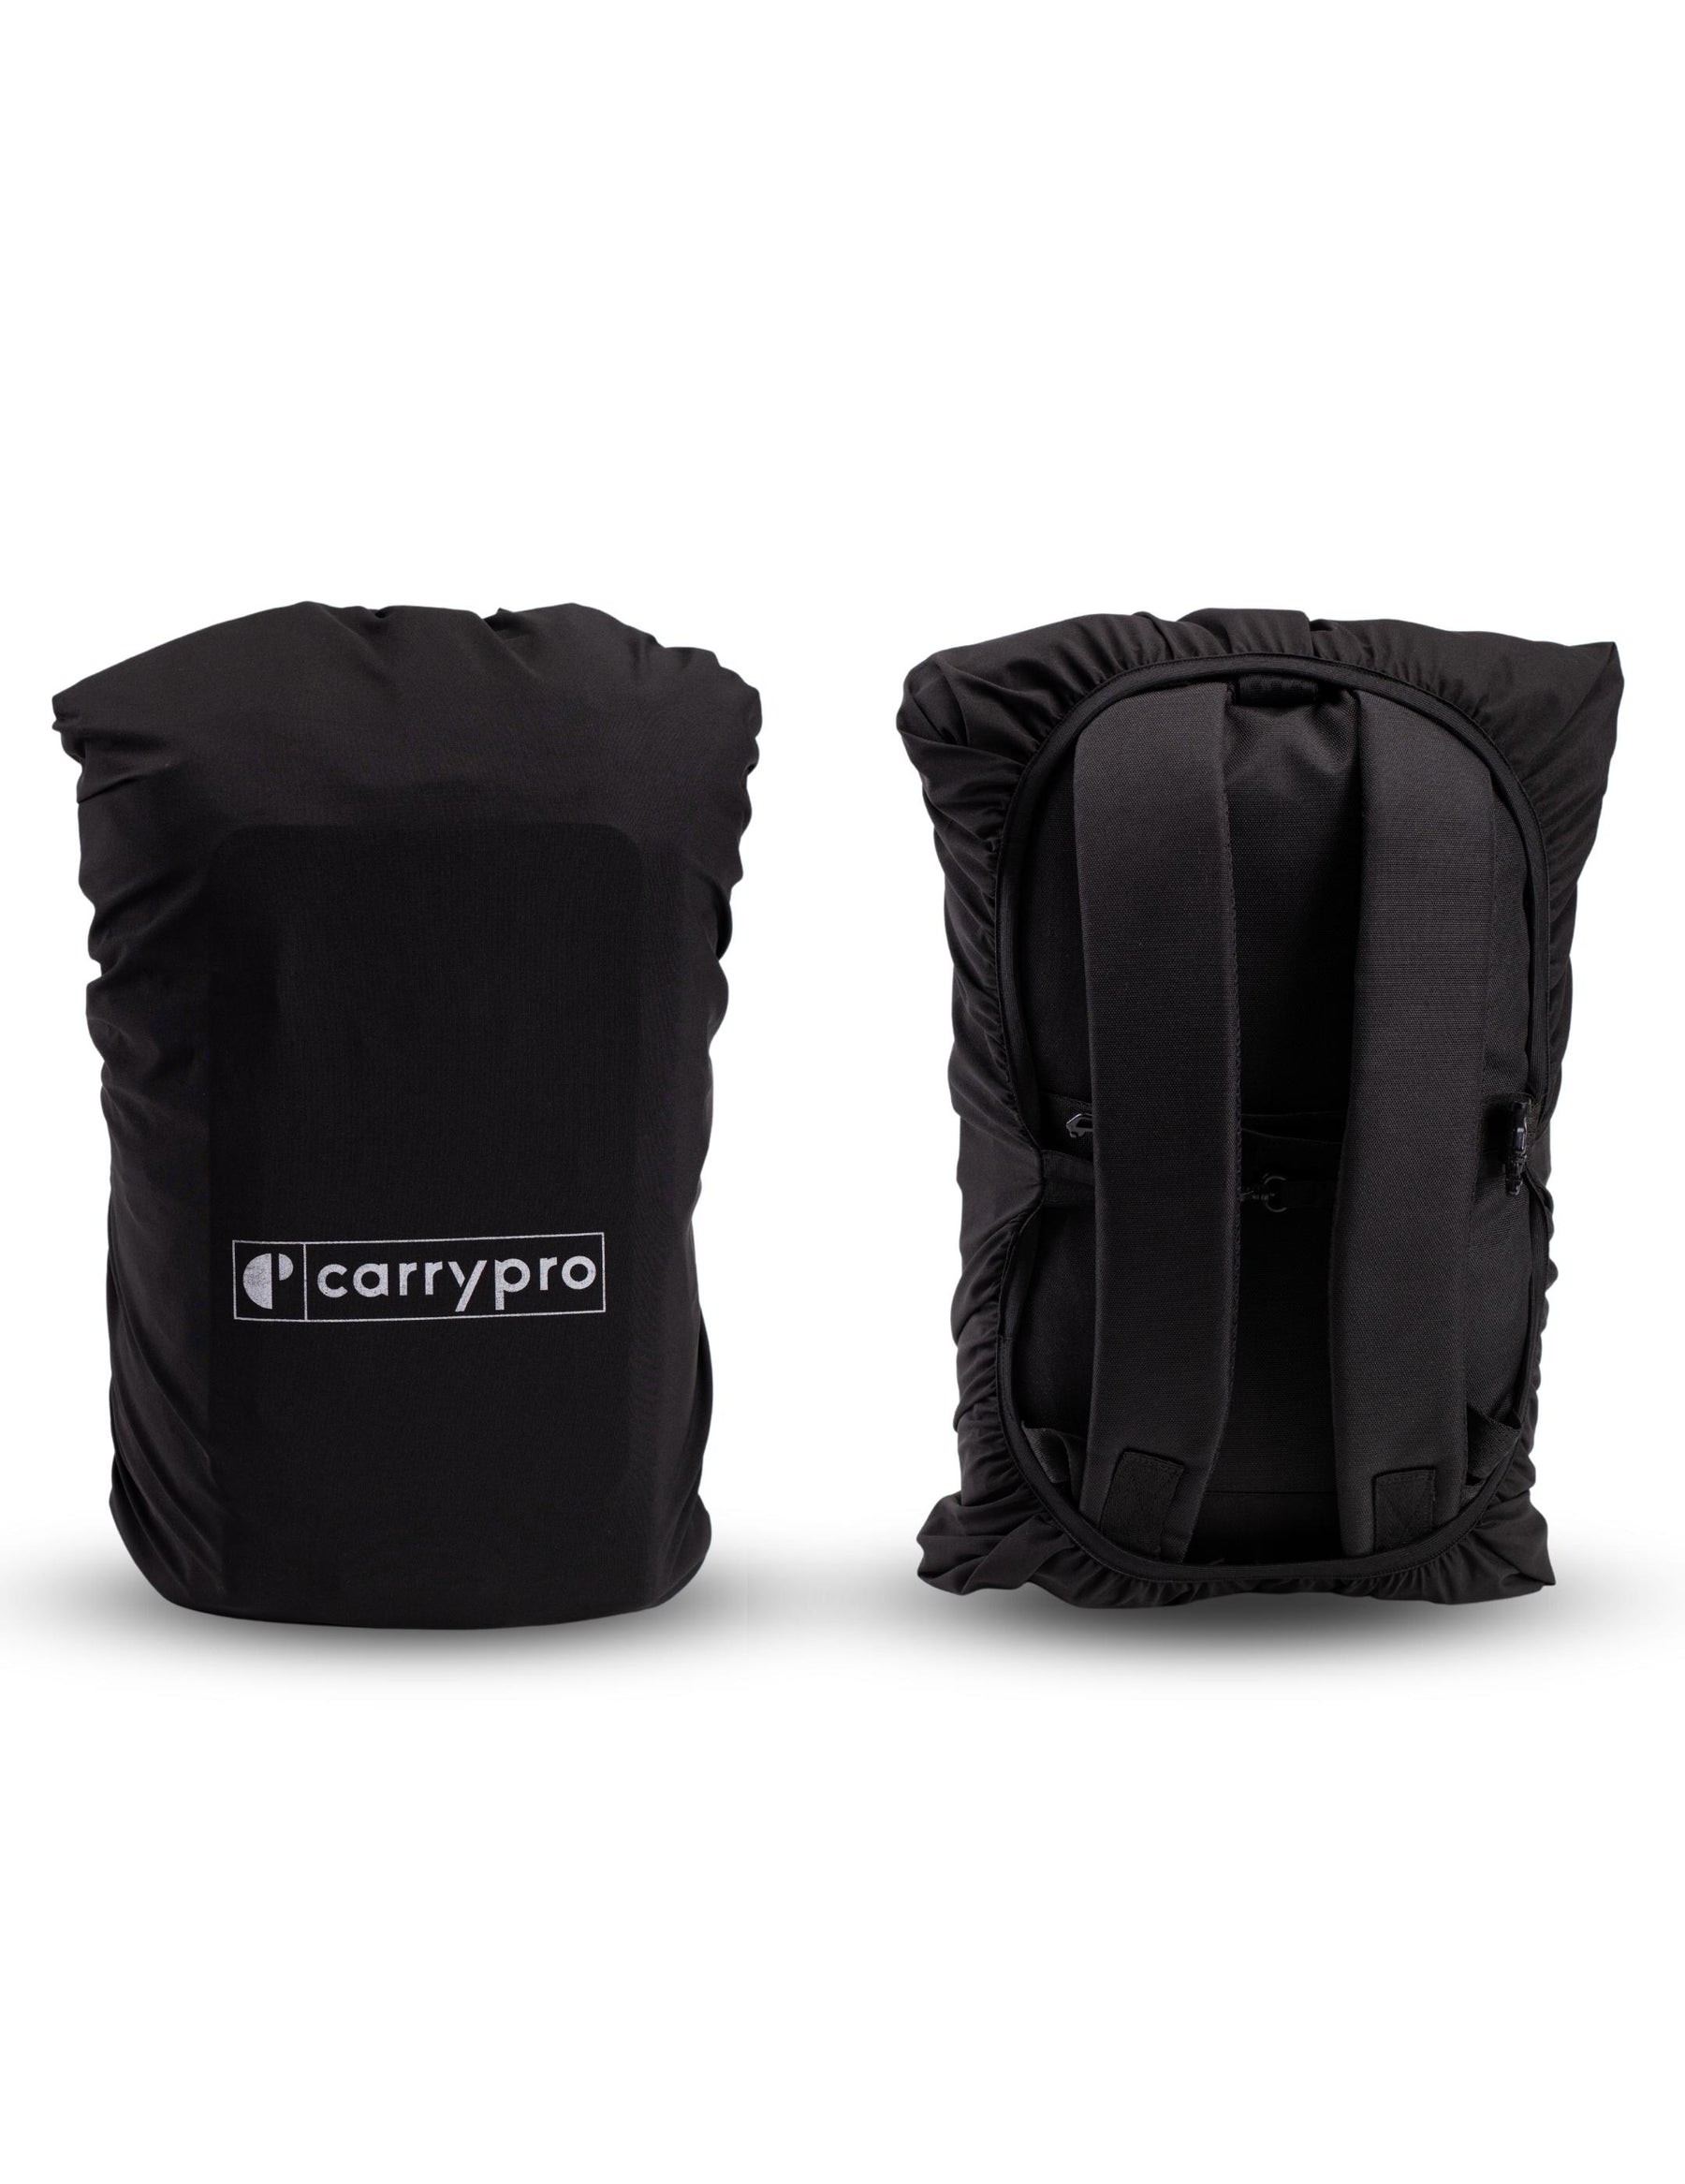 PRO Rain & Dust Cover for Backpack, 15-24 Ltrs (Recommended for MOJO Everyday Backpack)